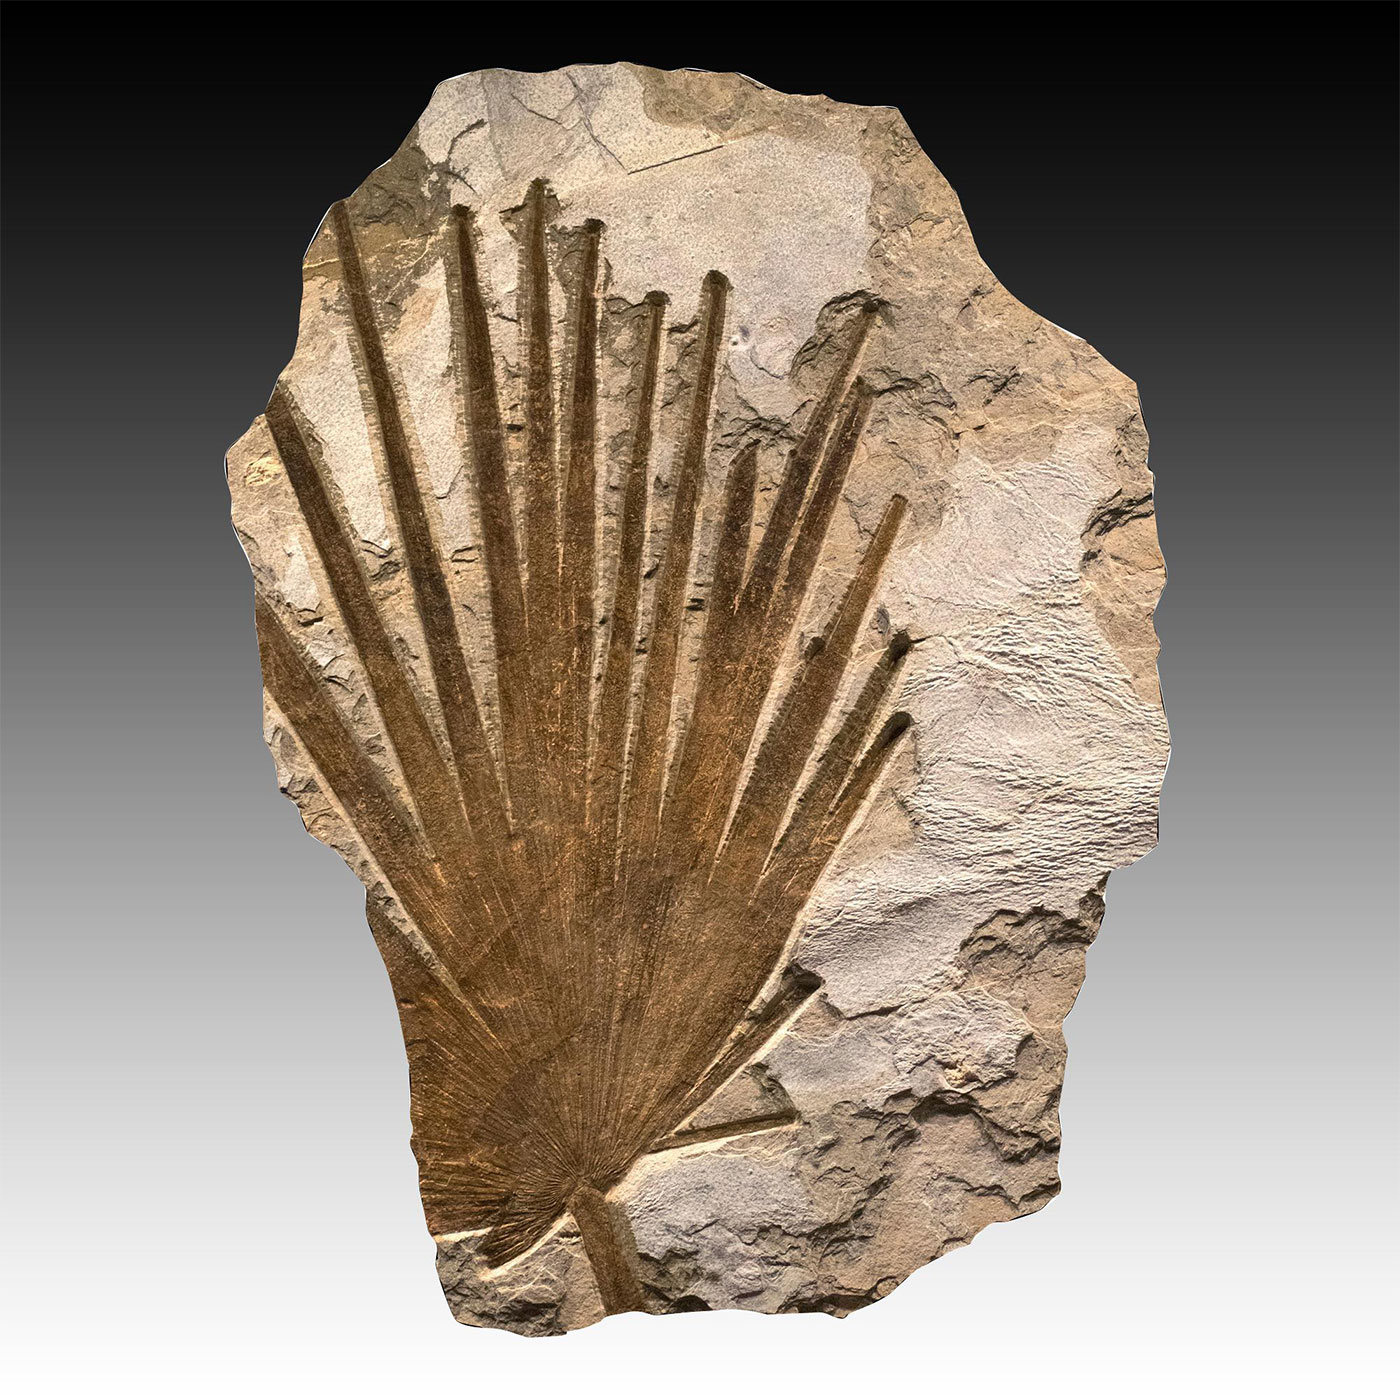 PARTIAL FOSSIL PALM FROND, GREEN RIVER, WYOMING